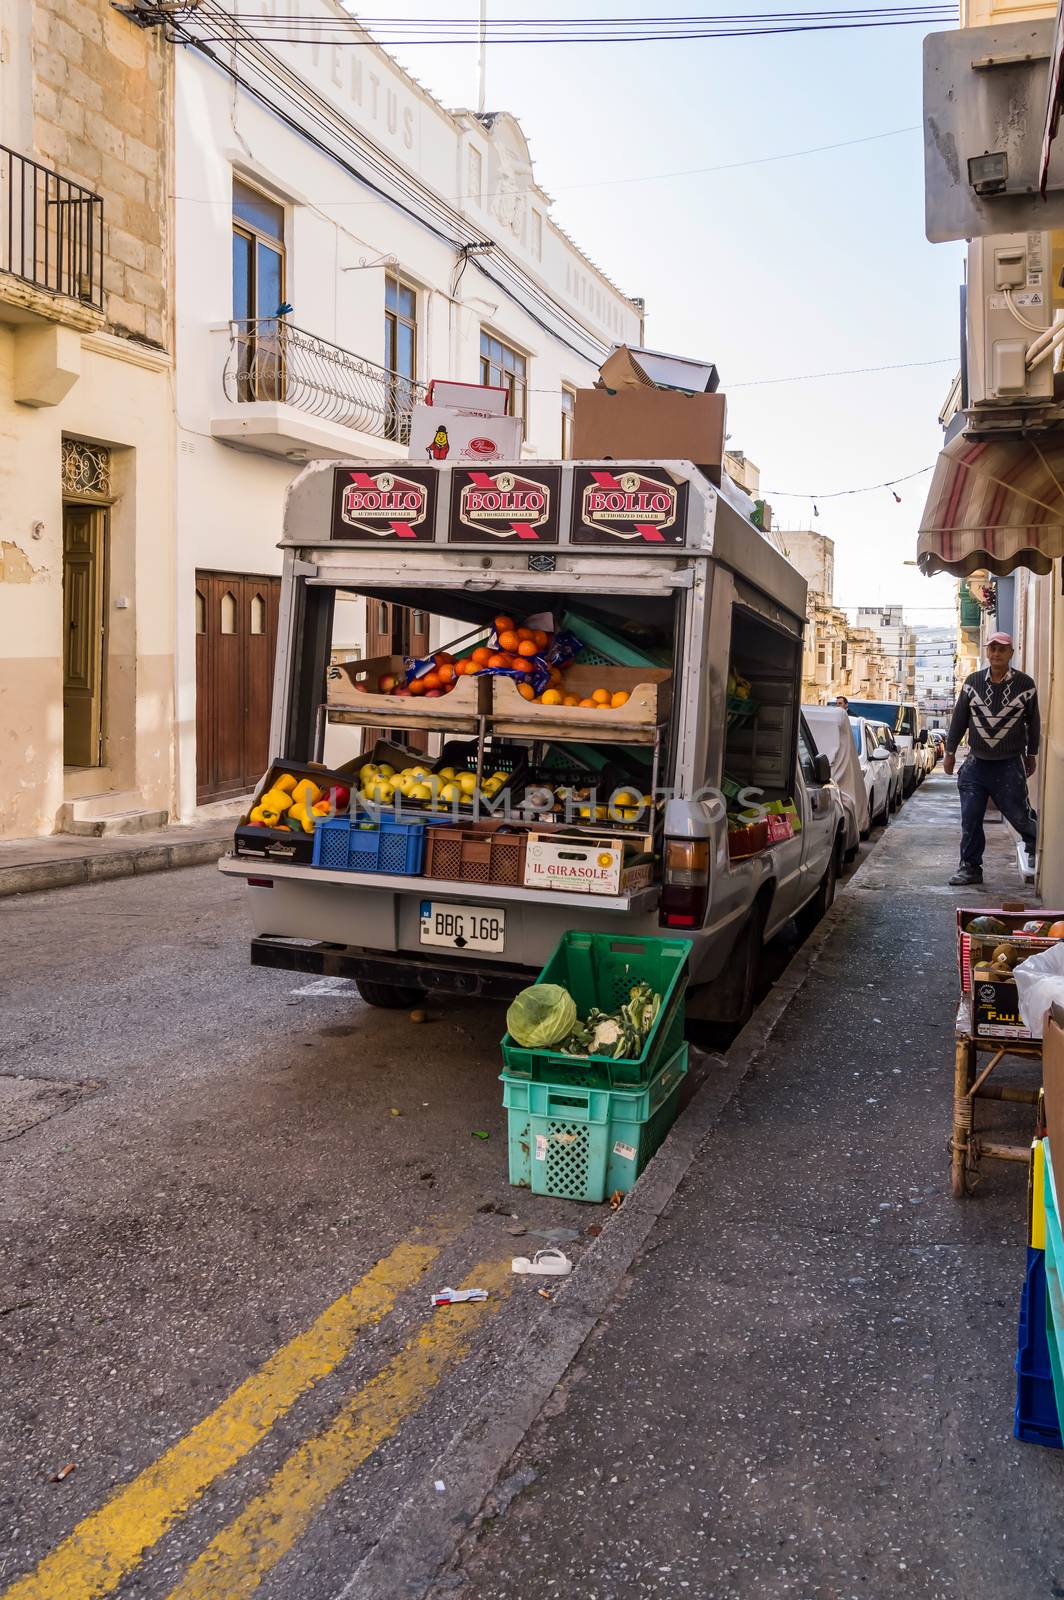 La Vallette,Malte,Europe-30/11/2019.Small truck filled with vege by Philou1000